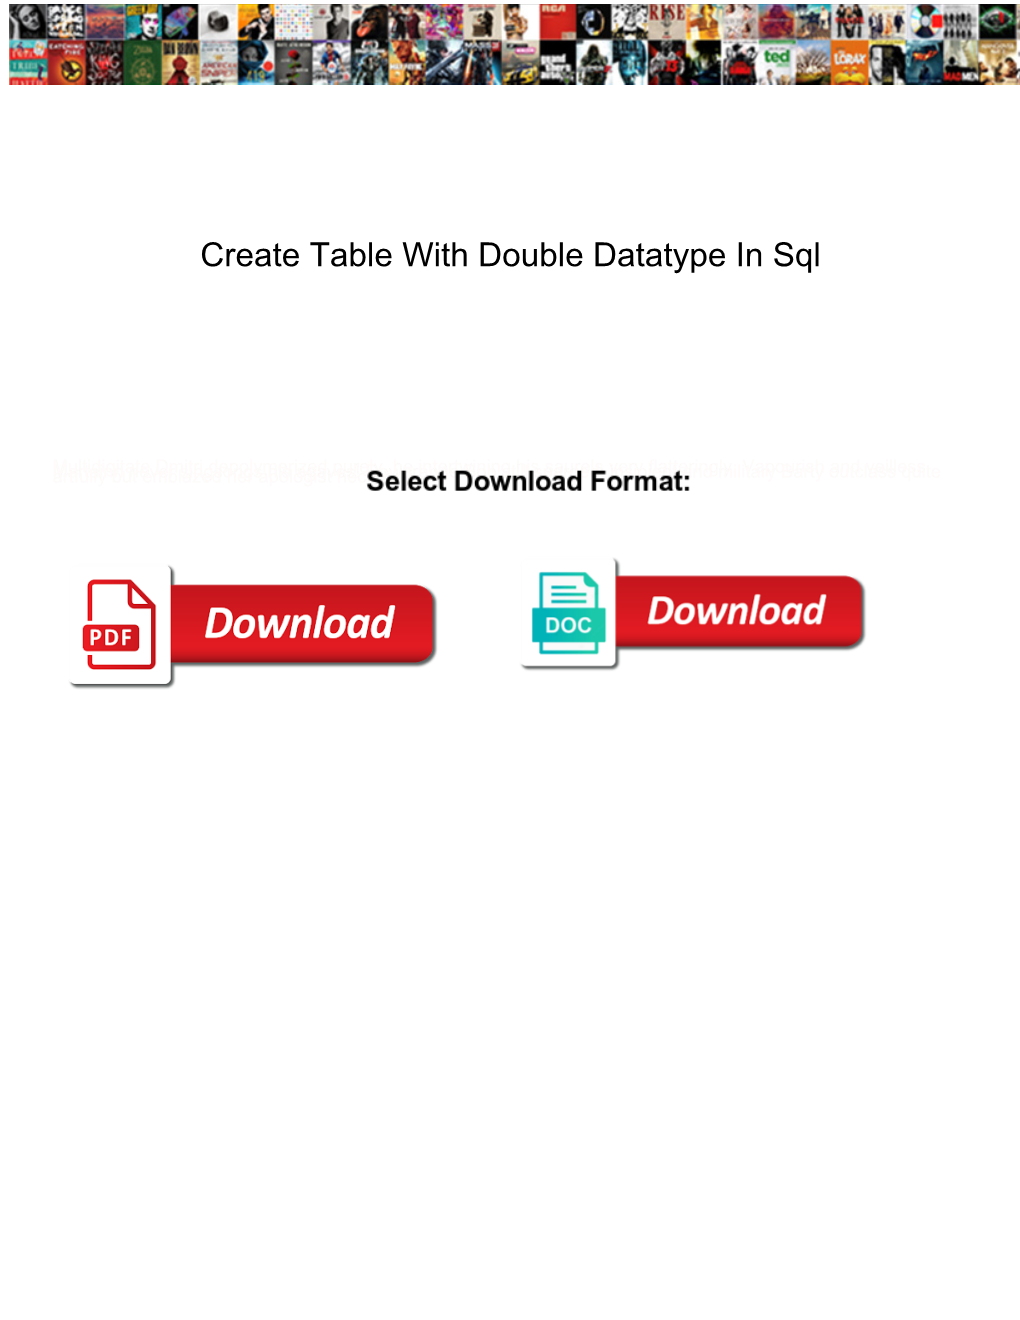 Create Table with Double Datatype in Sql